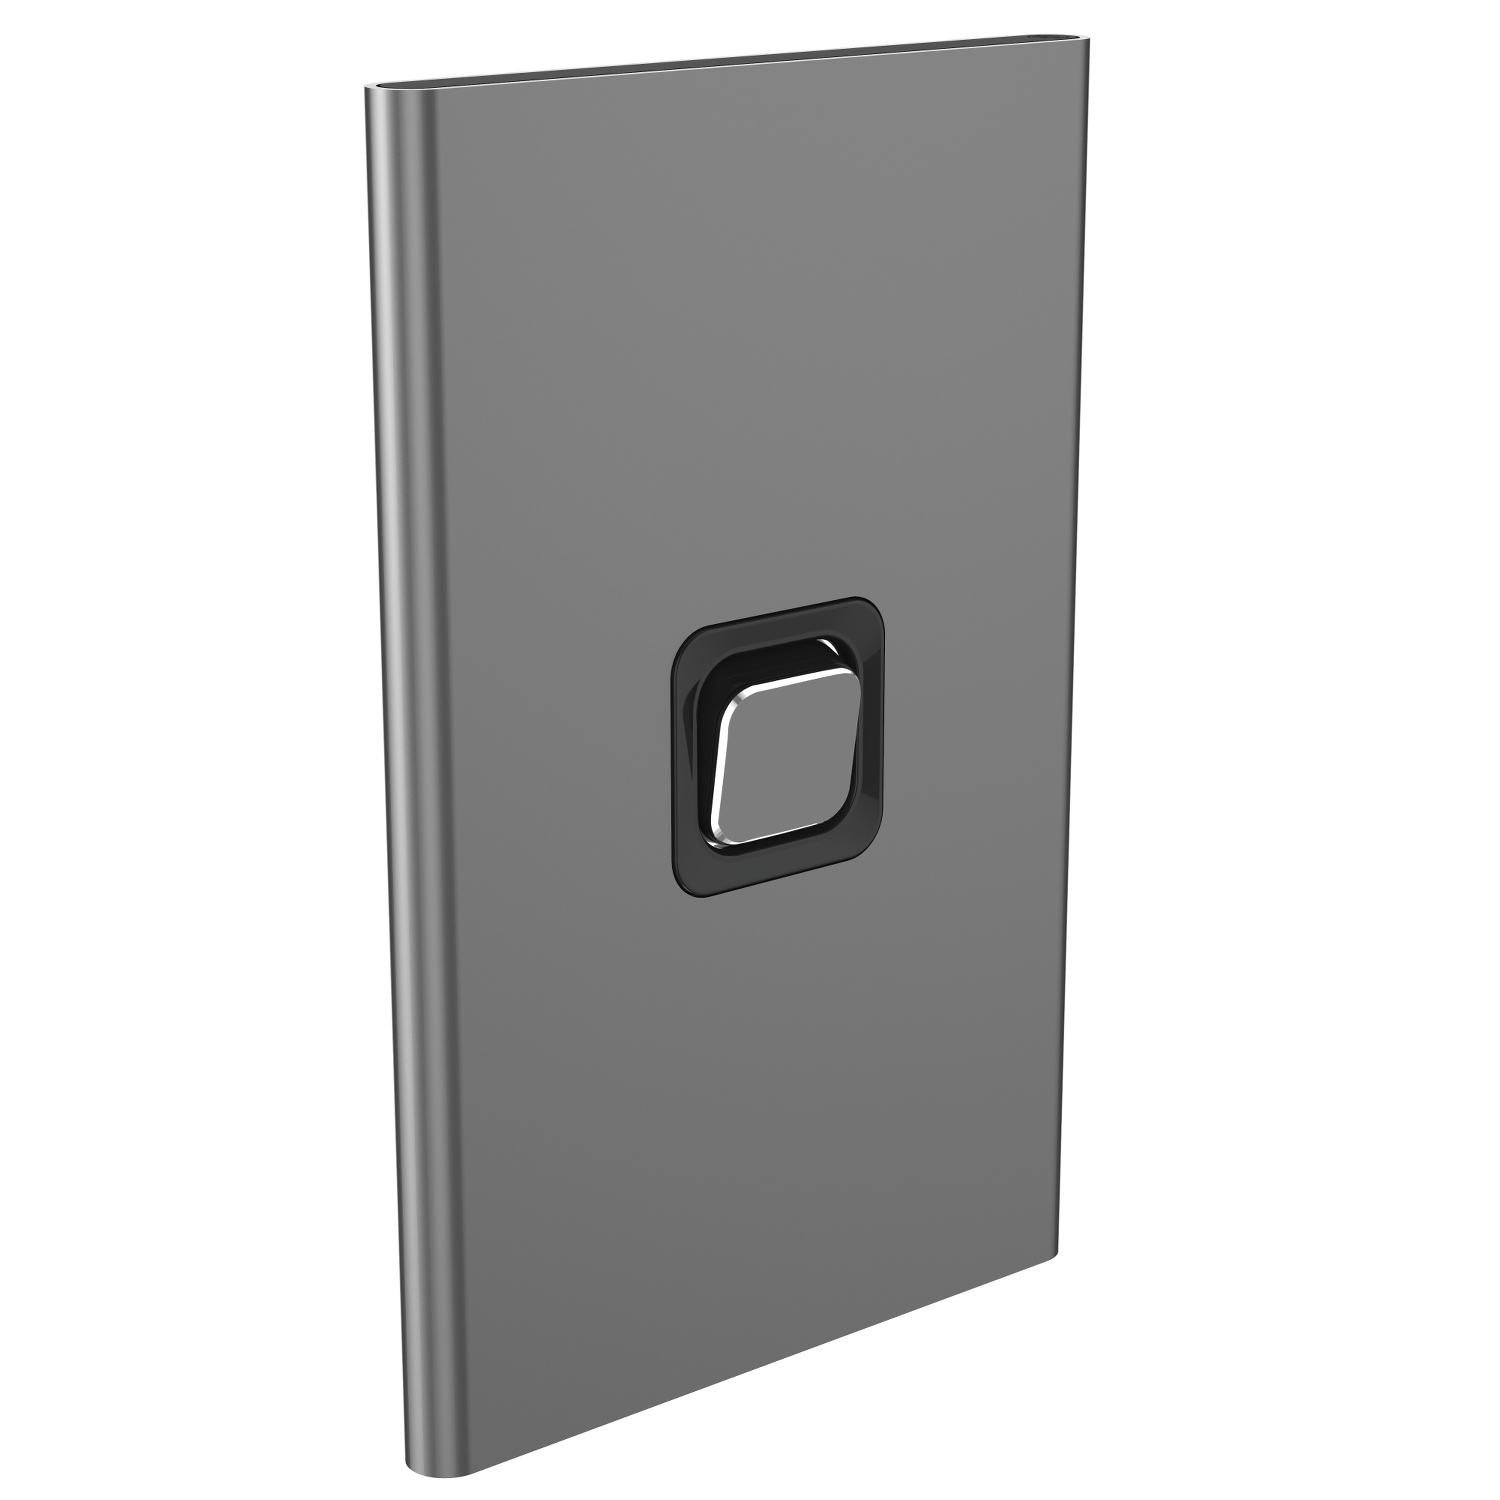 PDLS381C-SH - PDL Iconic Styl, cover frame, 1 switch, vertical - Silver Shadow